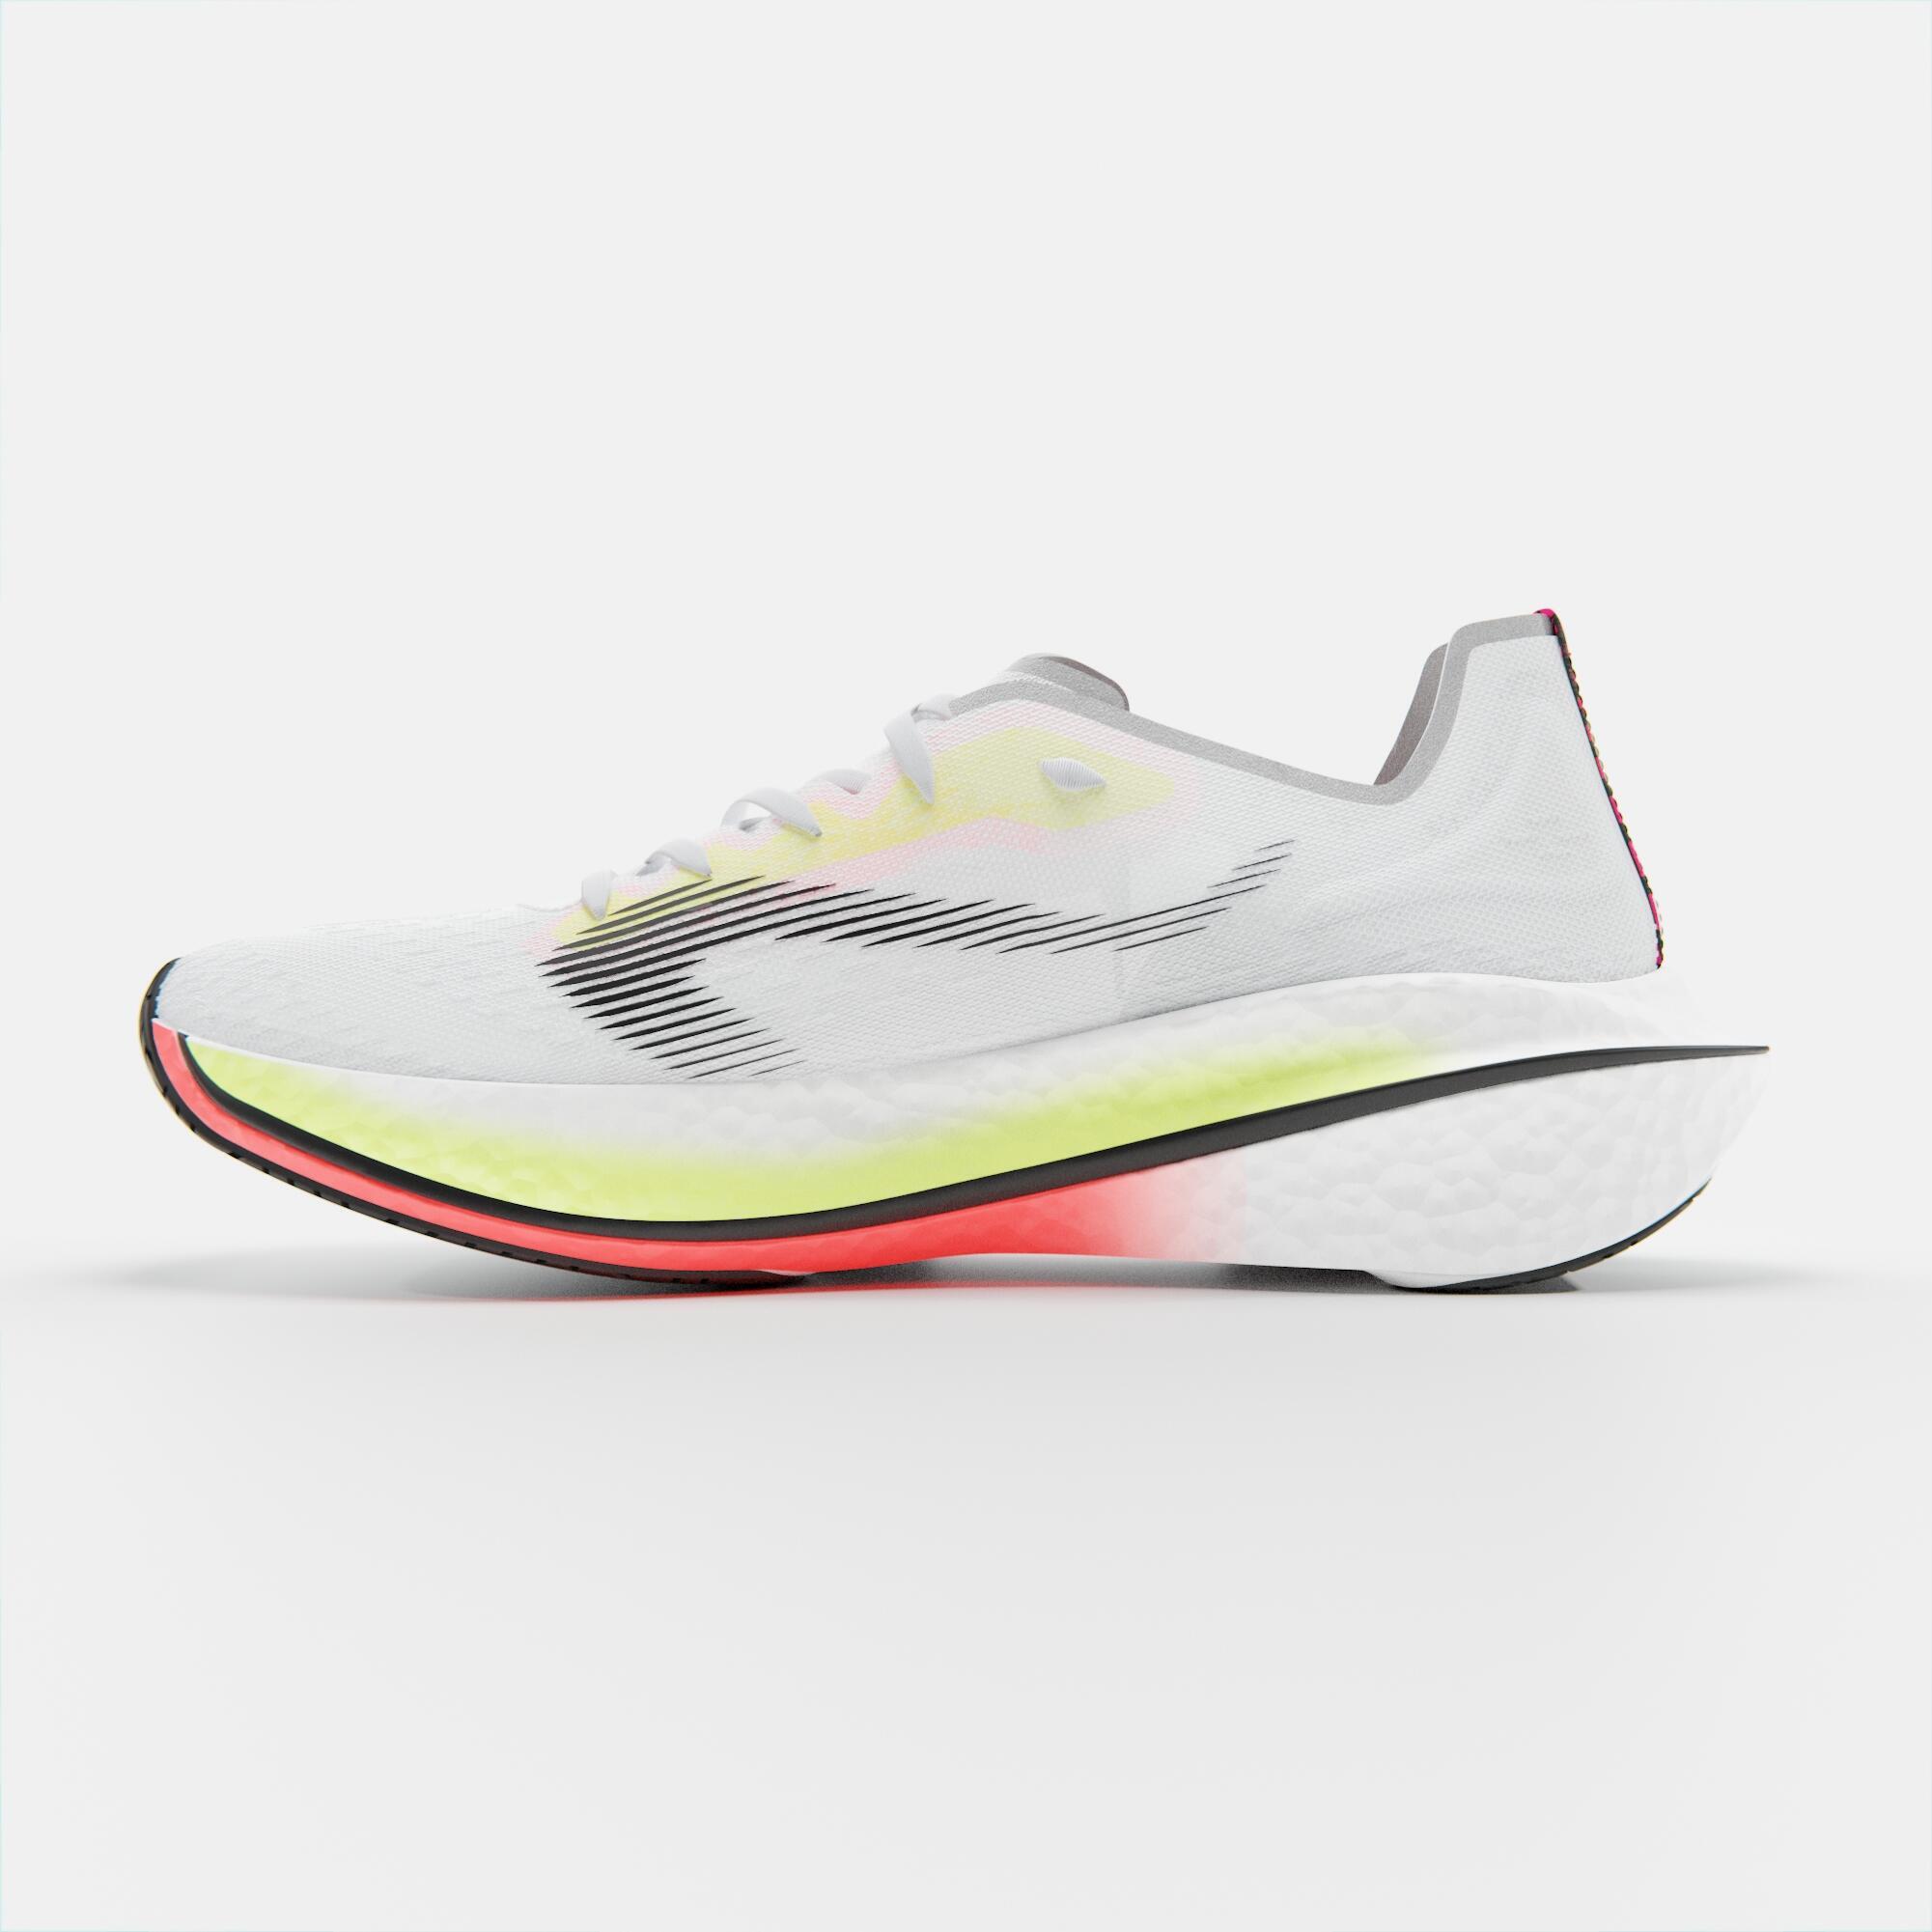 KIPRUN KD900X MEN'S RUNNING SHOES WITH CARBON PLATE-WHITE 3/8